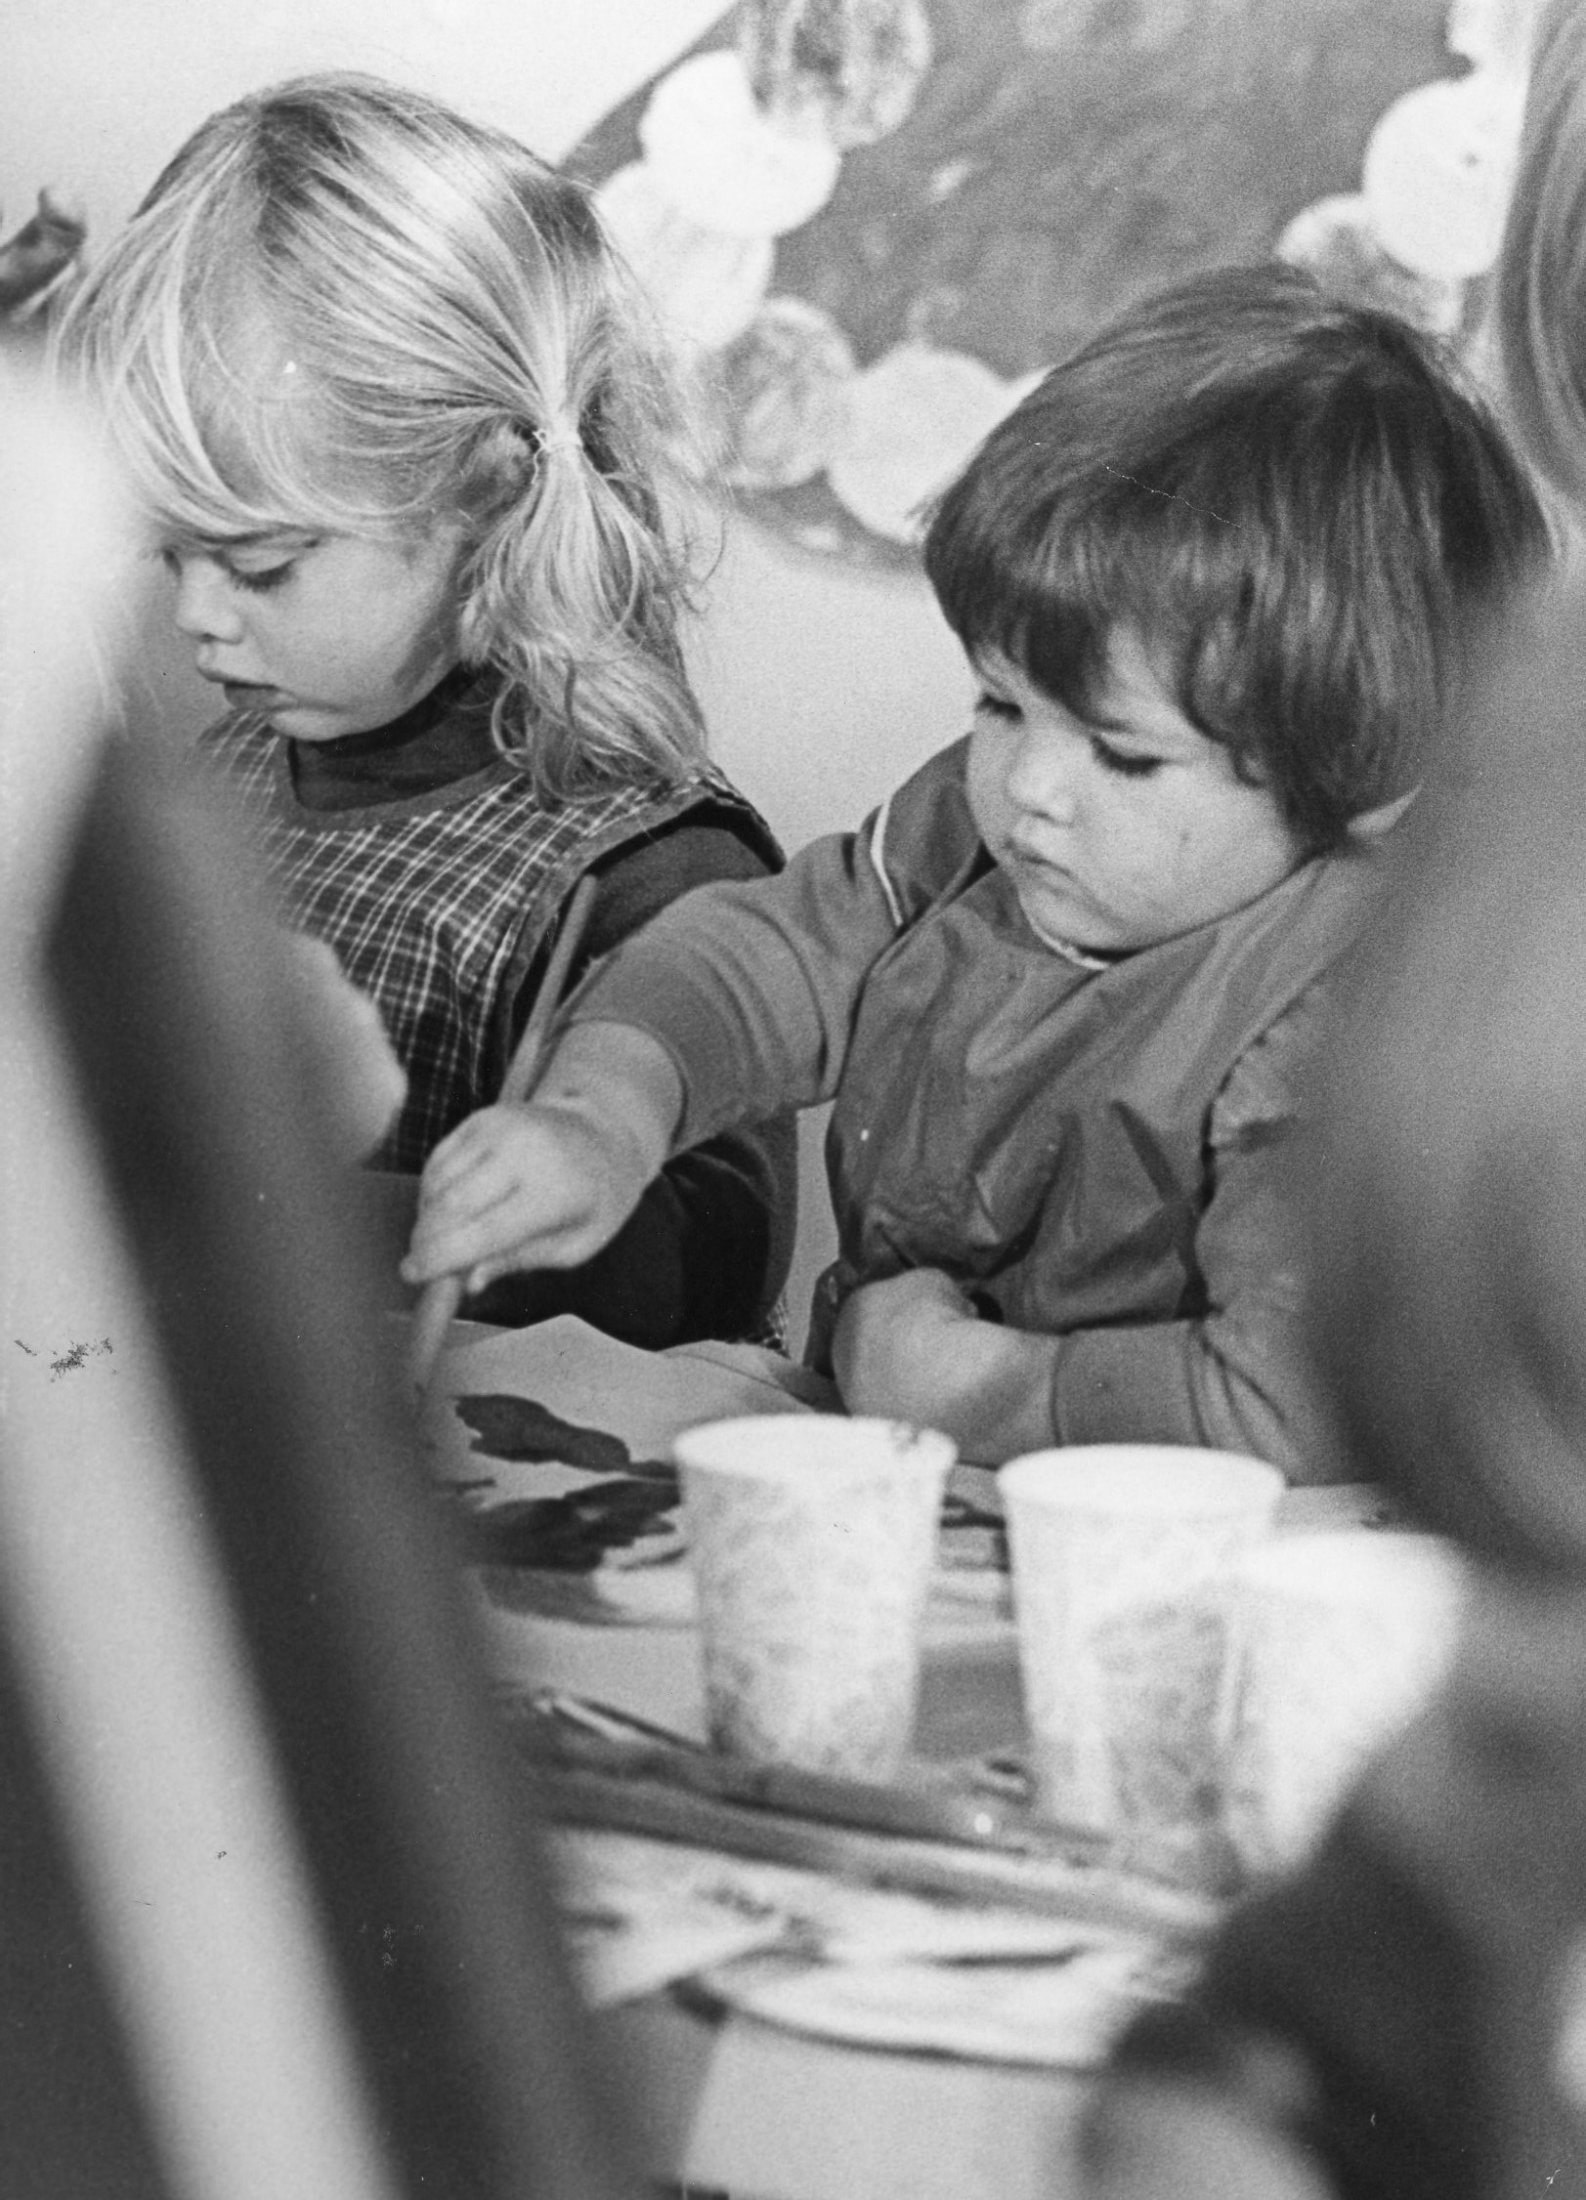 1977 - KC - Mothers And Children Learning To Share